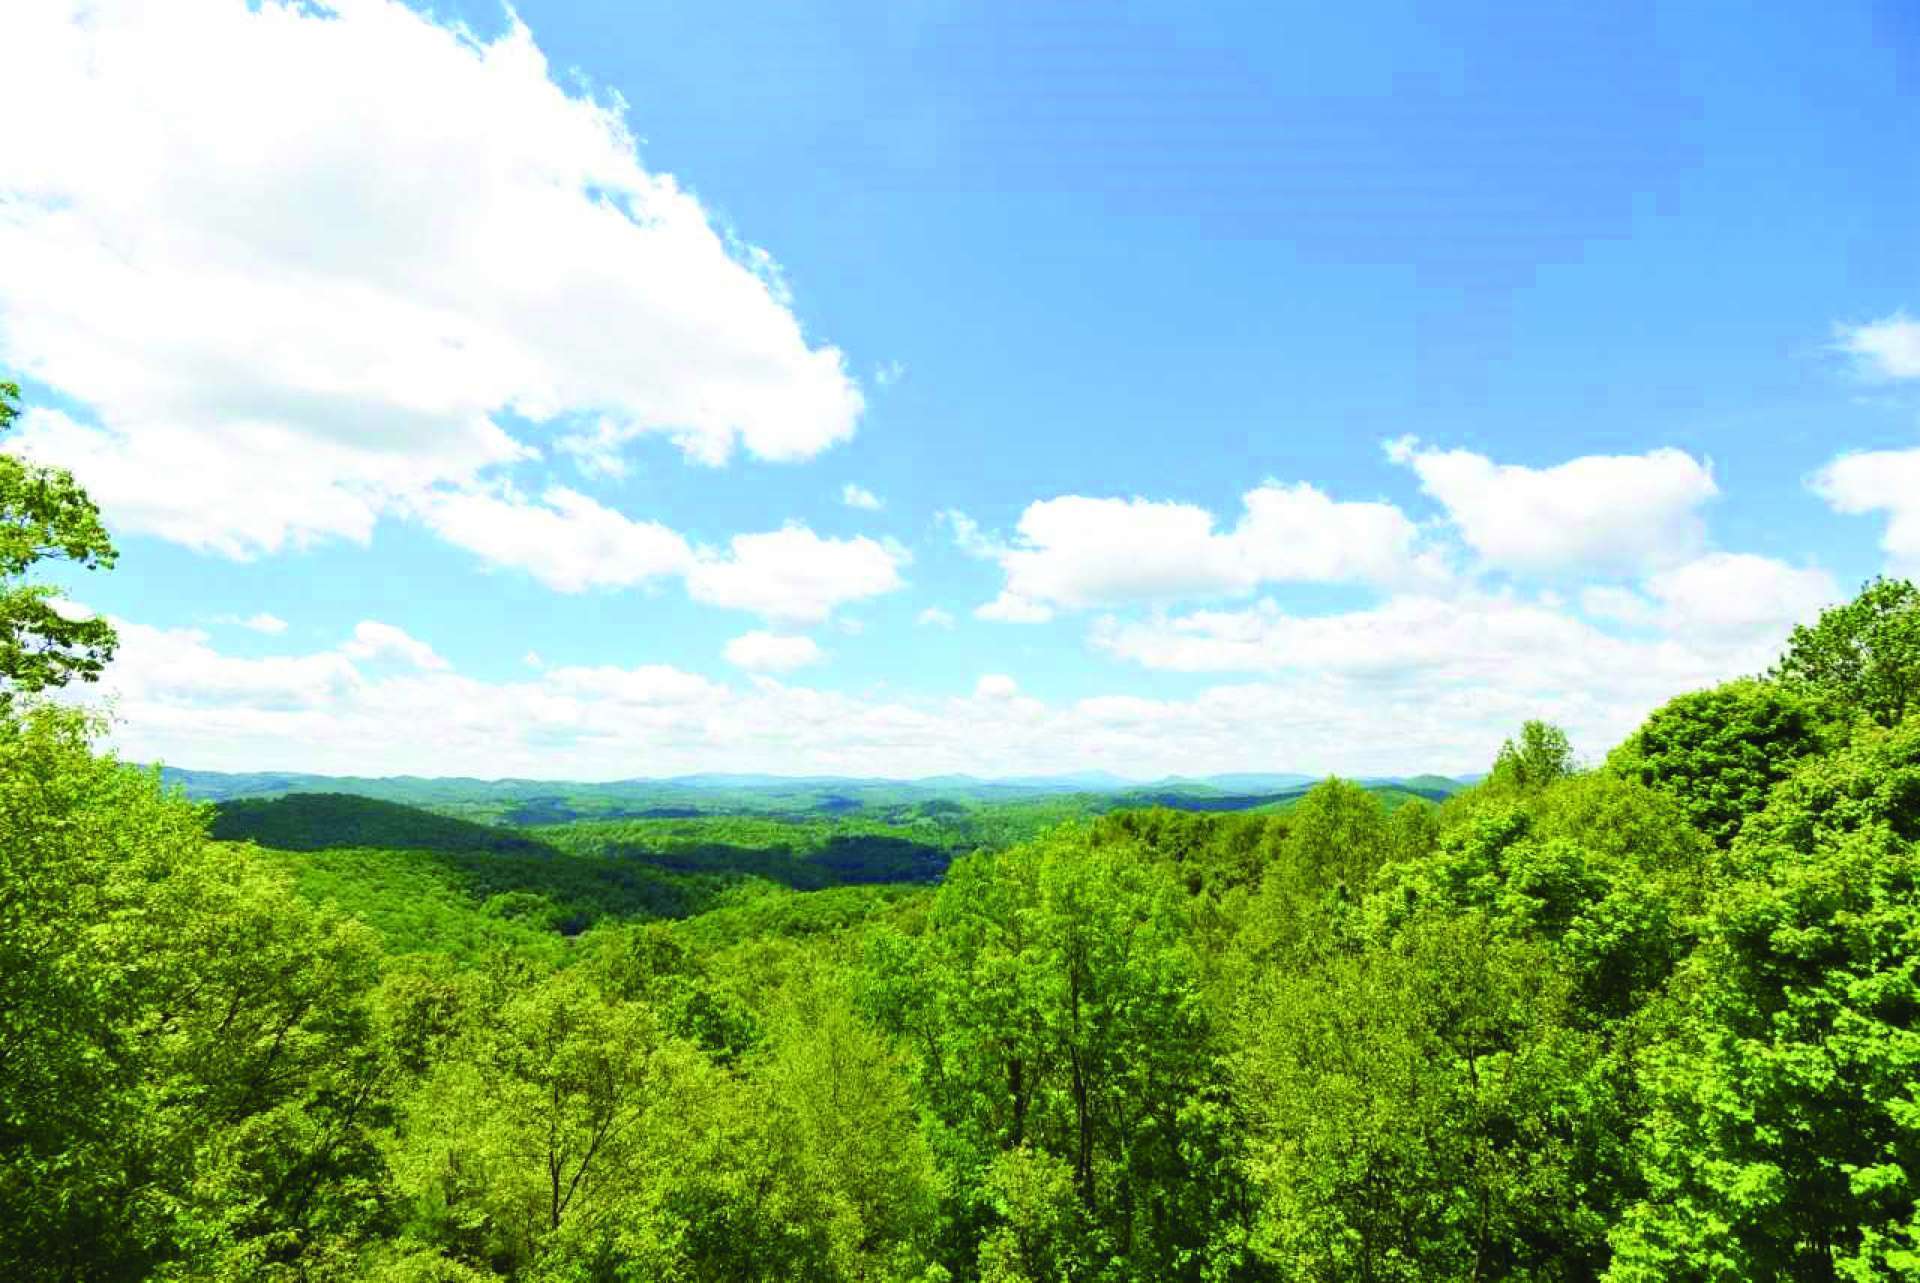 The views include layers of mountain vistas, including Grandfather Mountain.